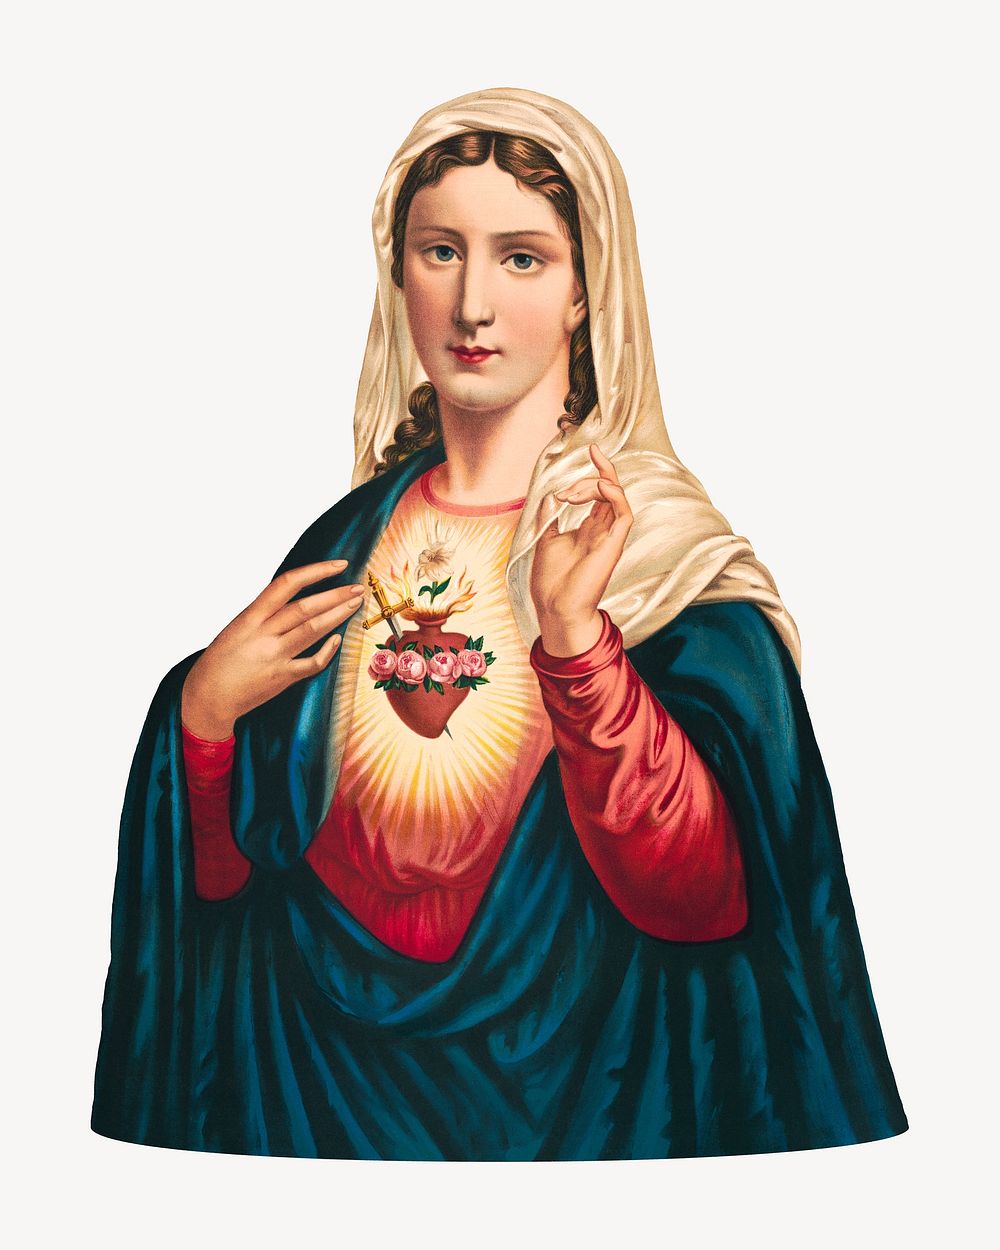 S.S. Heart of Mary, vintage religious illustration. Remixed by rawpixel.